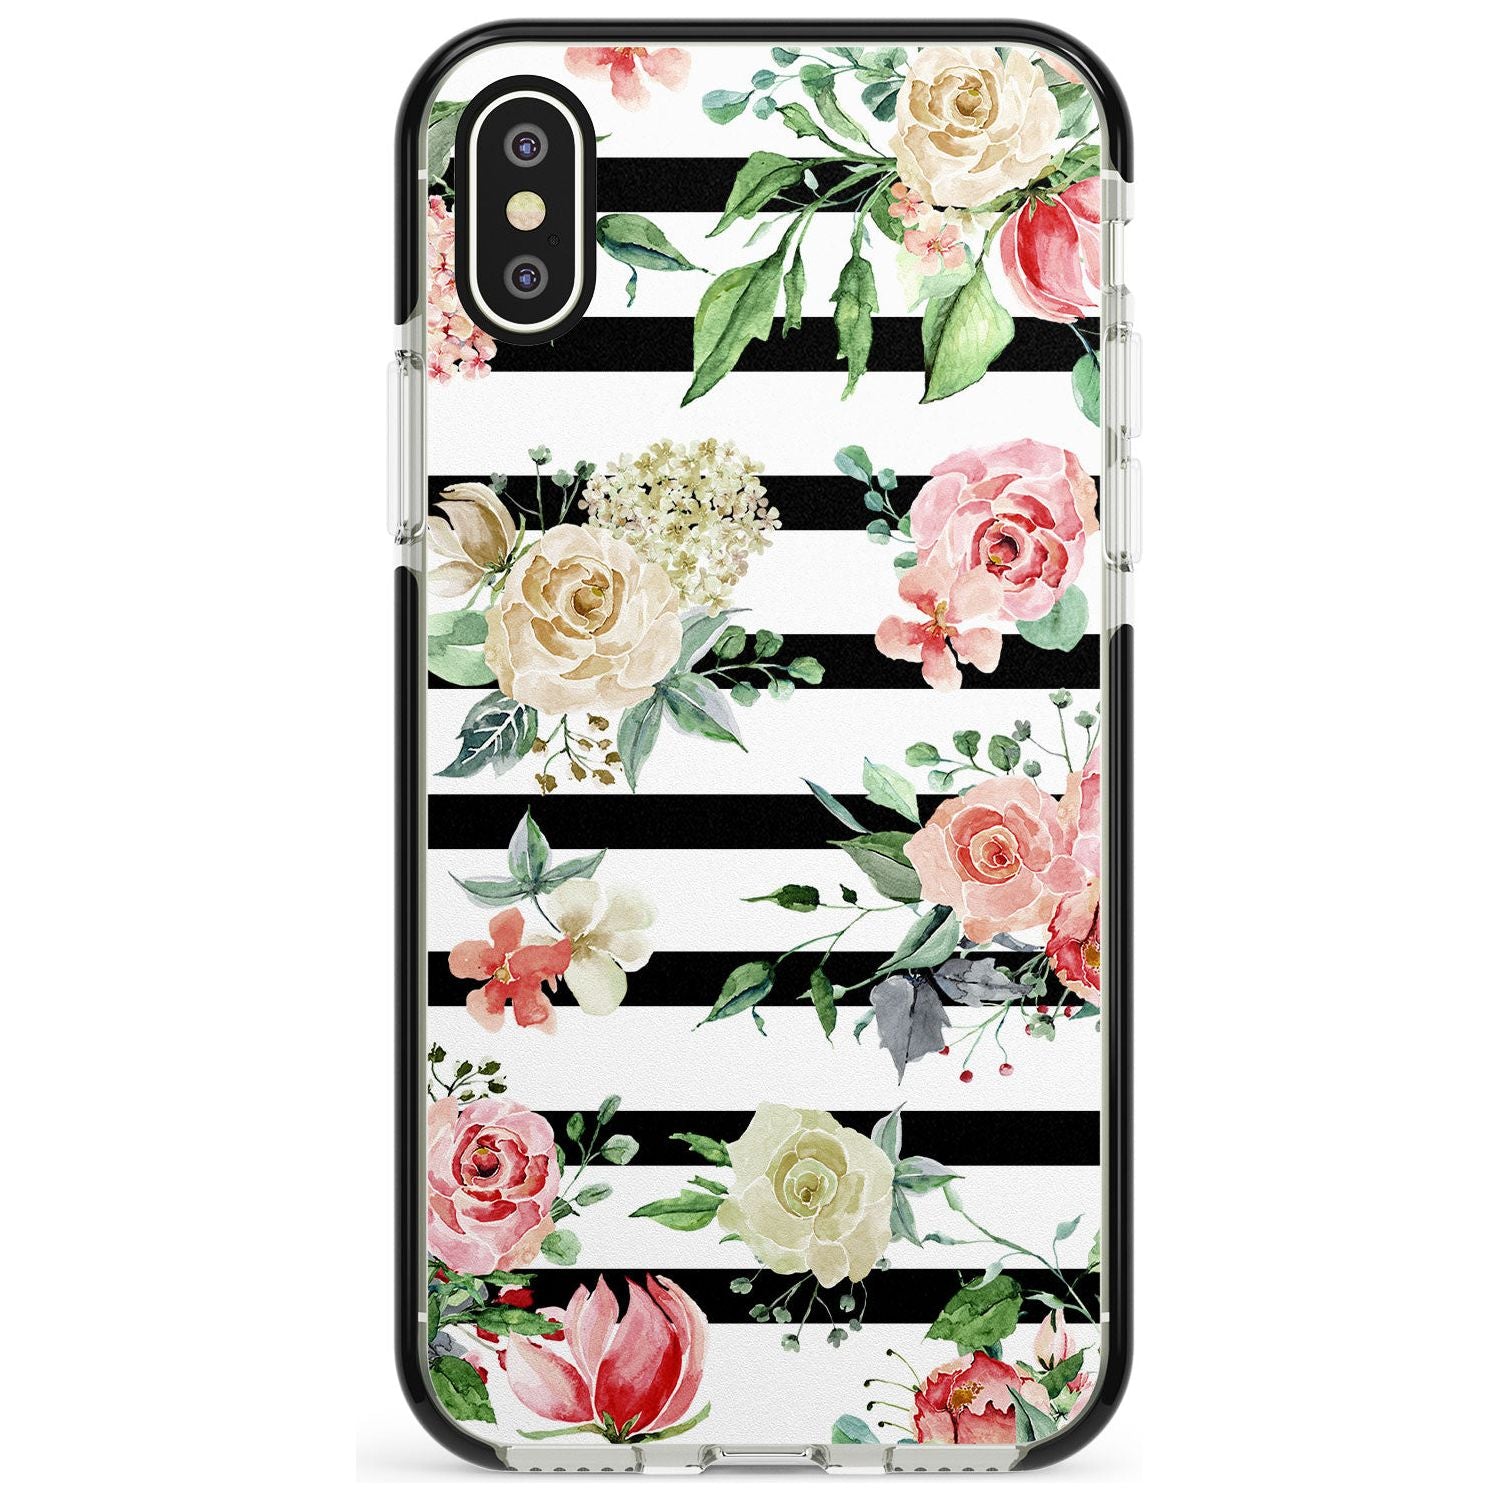 Bold Stripes & Flower Pattern Black Impact Phone Case for iPhone X XS Max XR